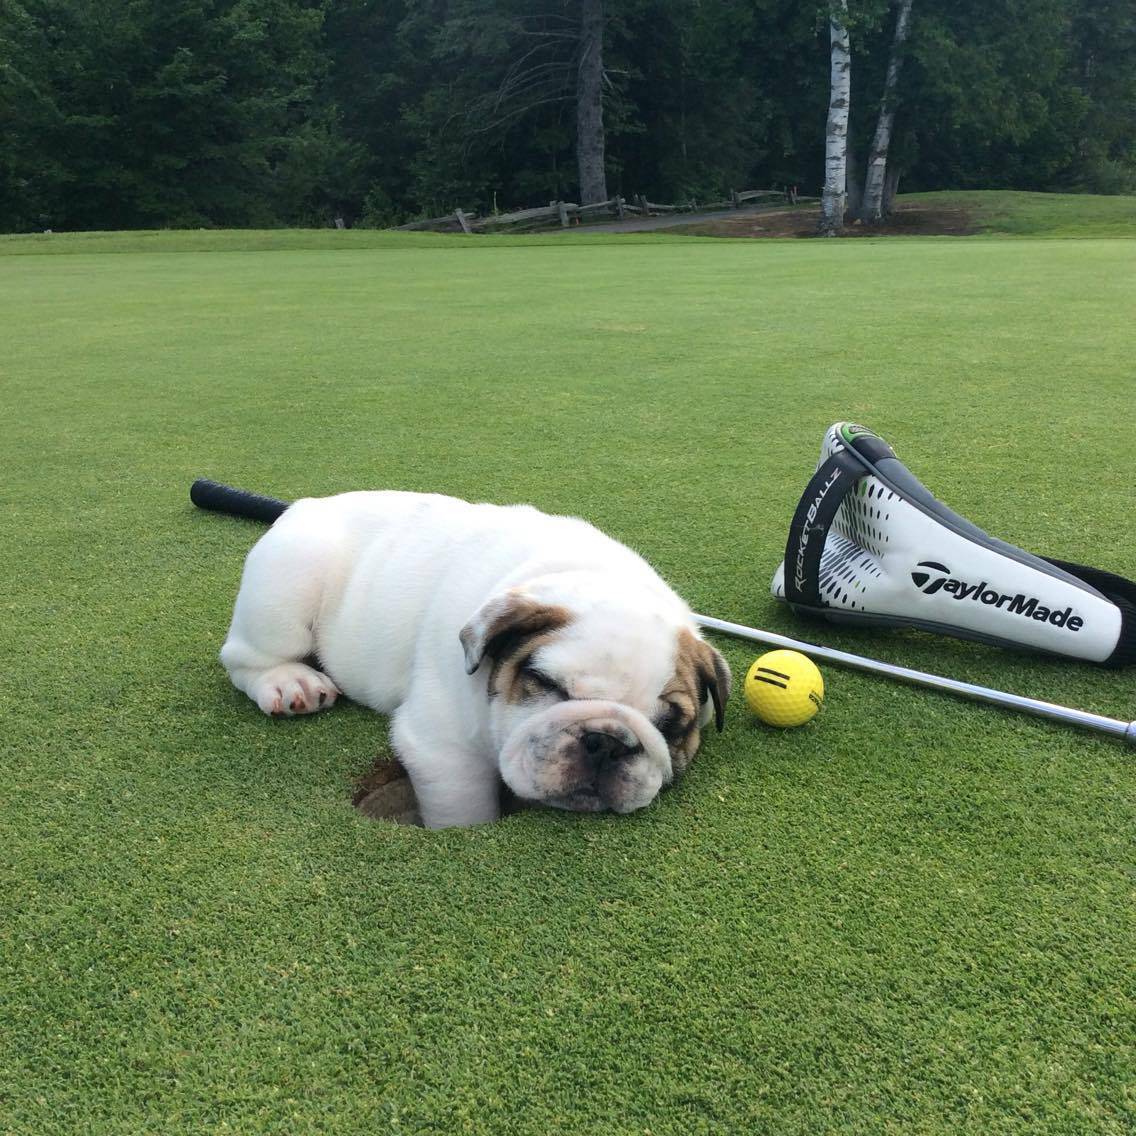 Pup and golf